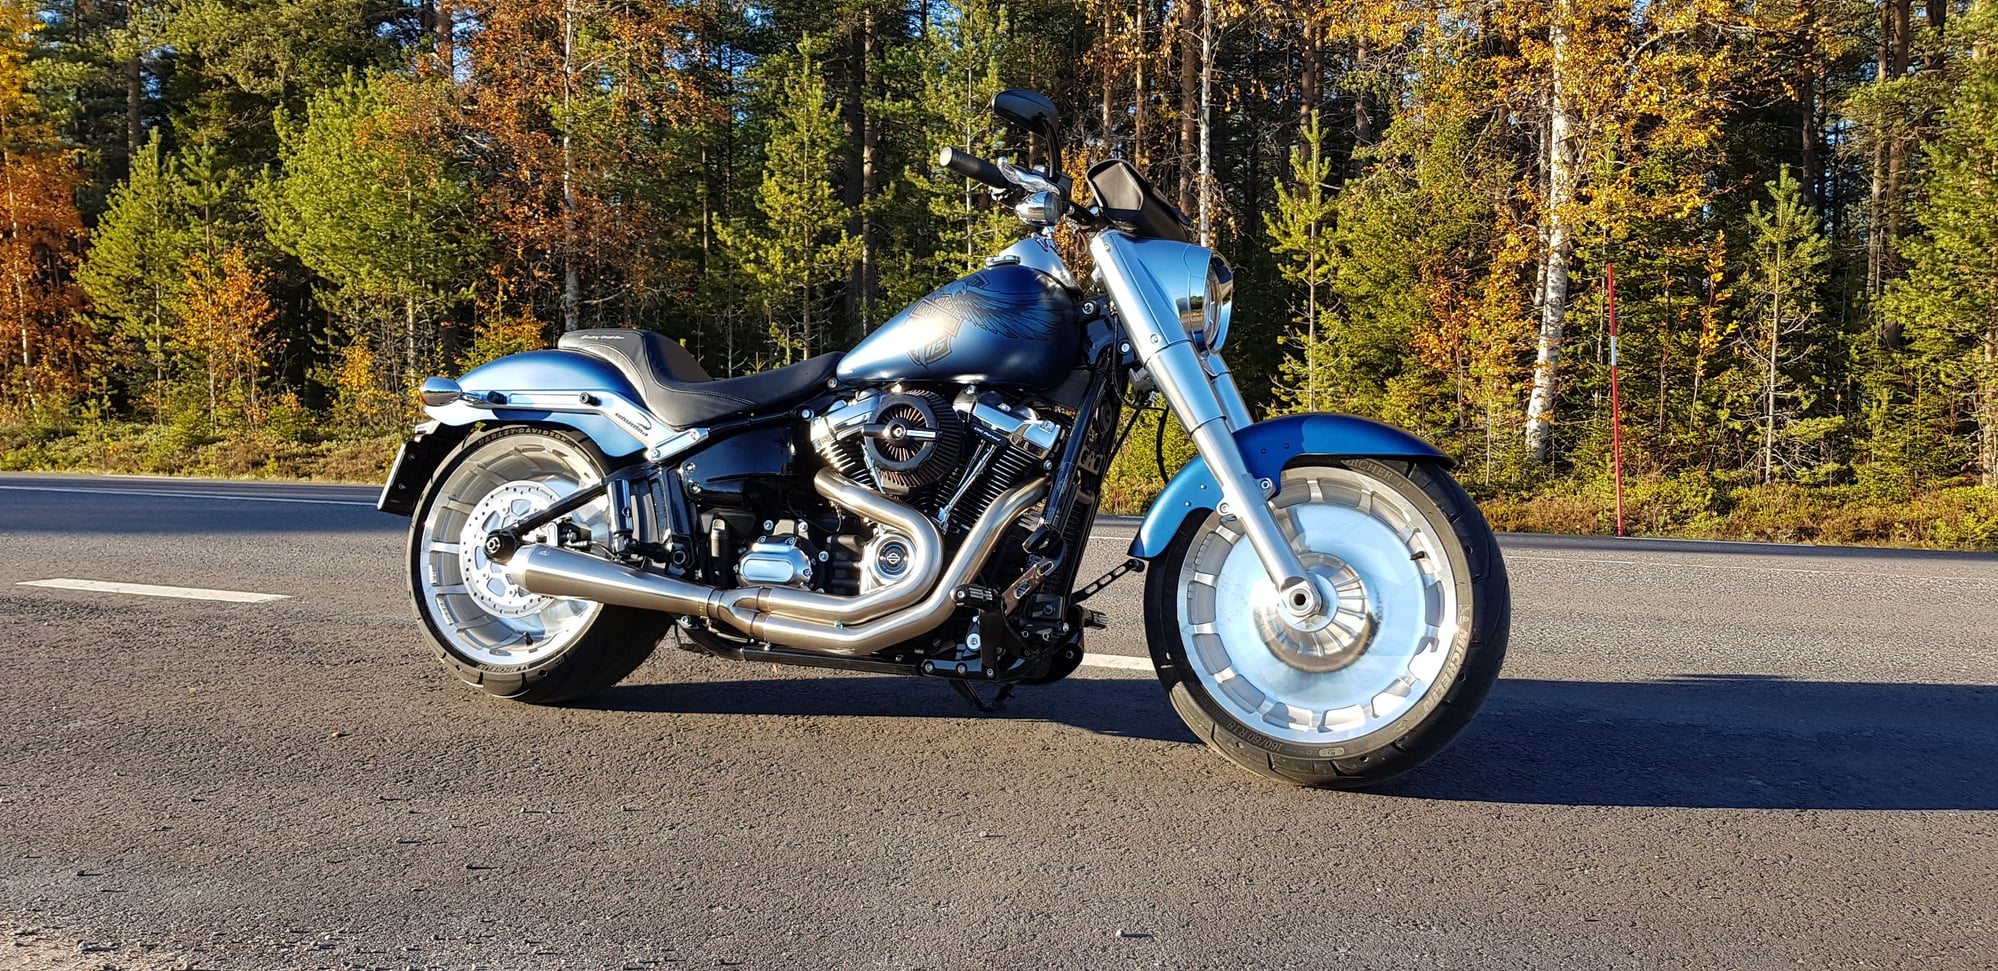 2018 fatboy 117 stage 4 for sale